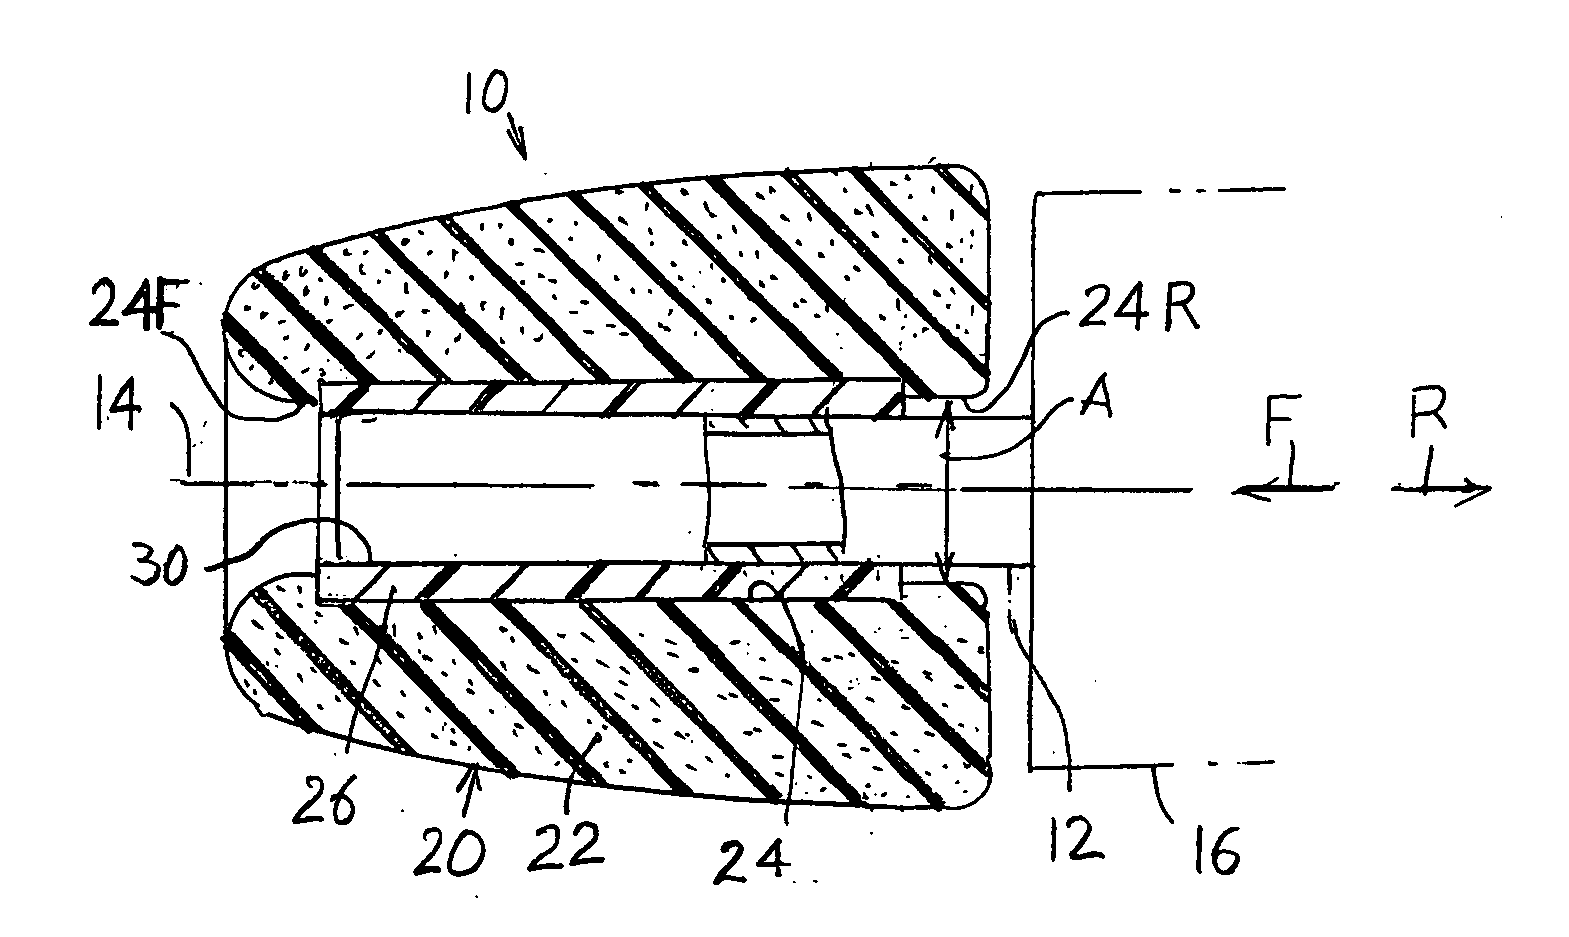 Earbud and method of manufacture